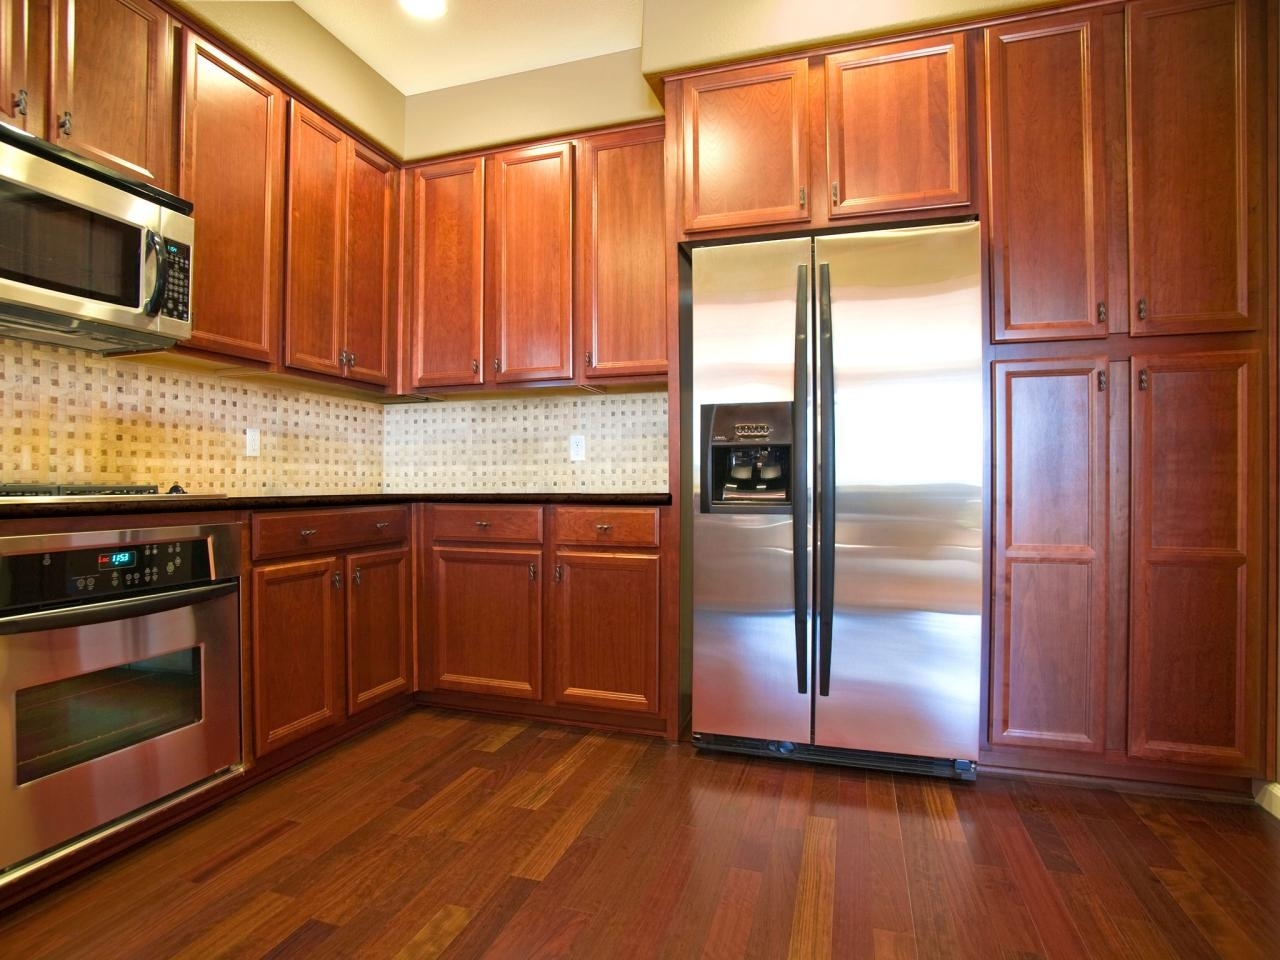 Oak Kitchen Cabinets Pictures Ideas Tips From Hgtv Hgtv 1 